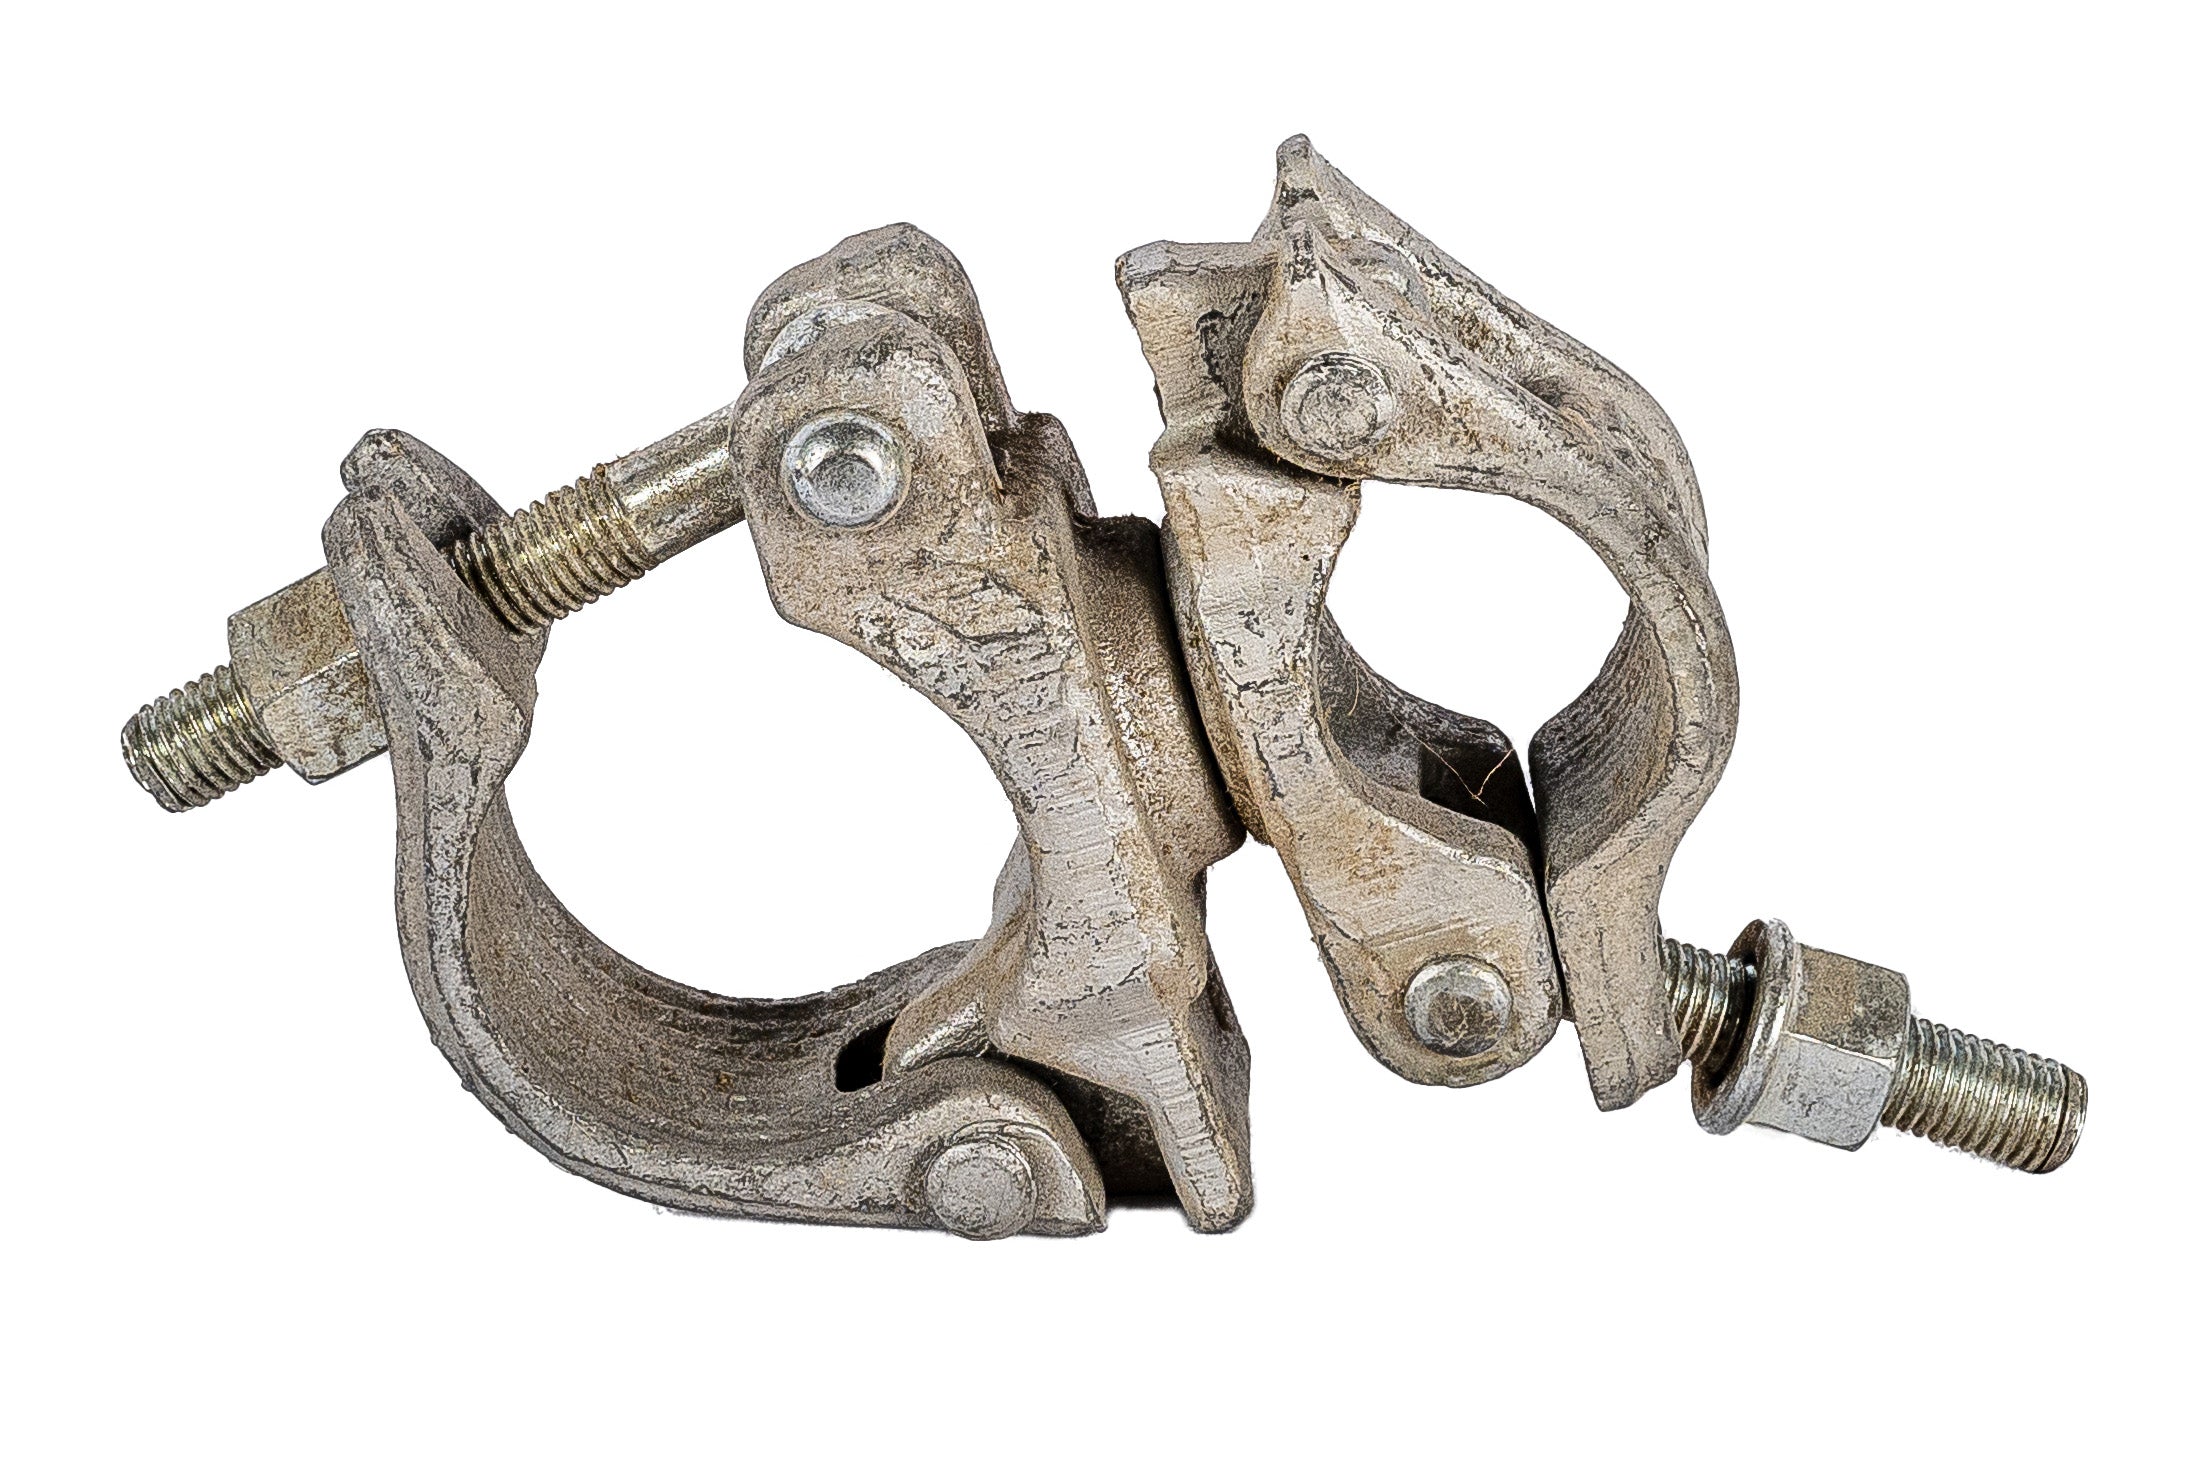 Buy Now the 2.5 x 2 Swivel I-Bolt Scaffold Clamp